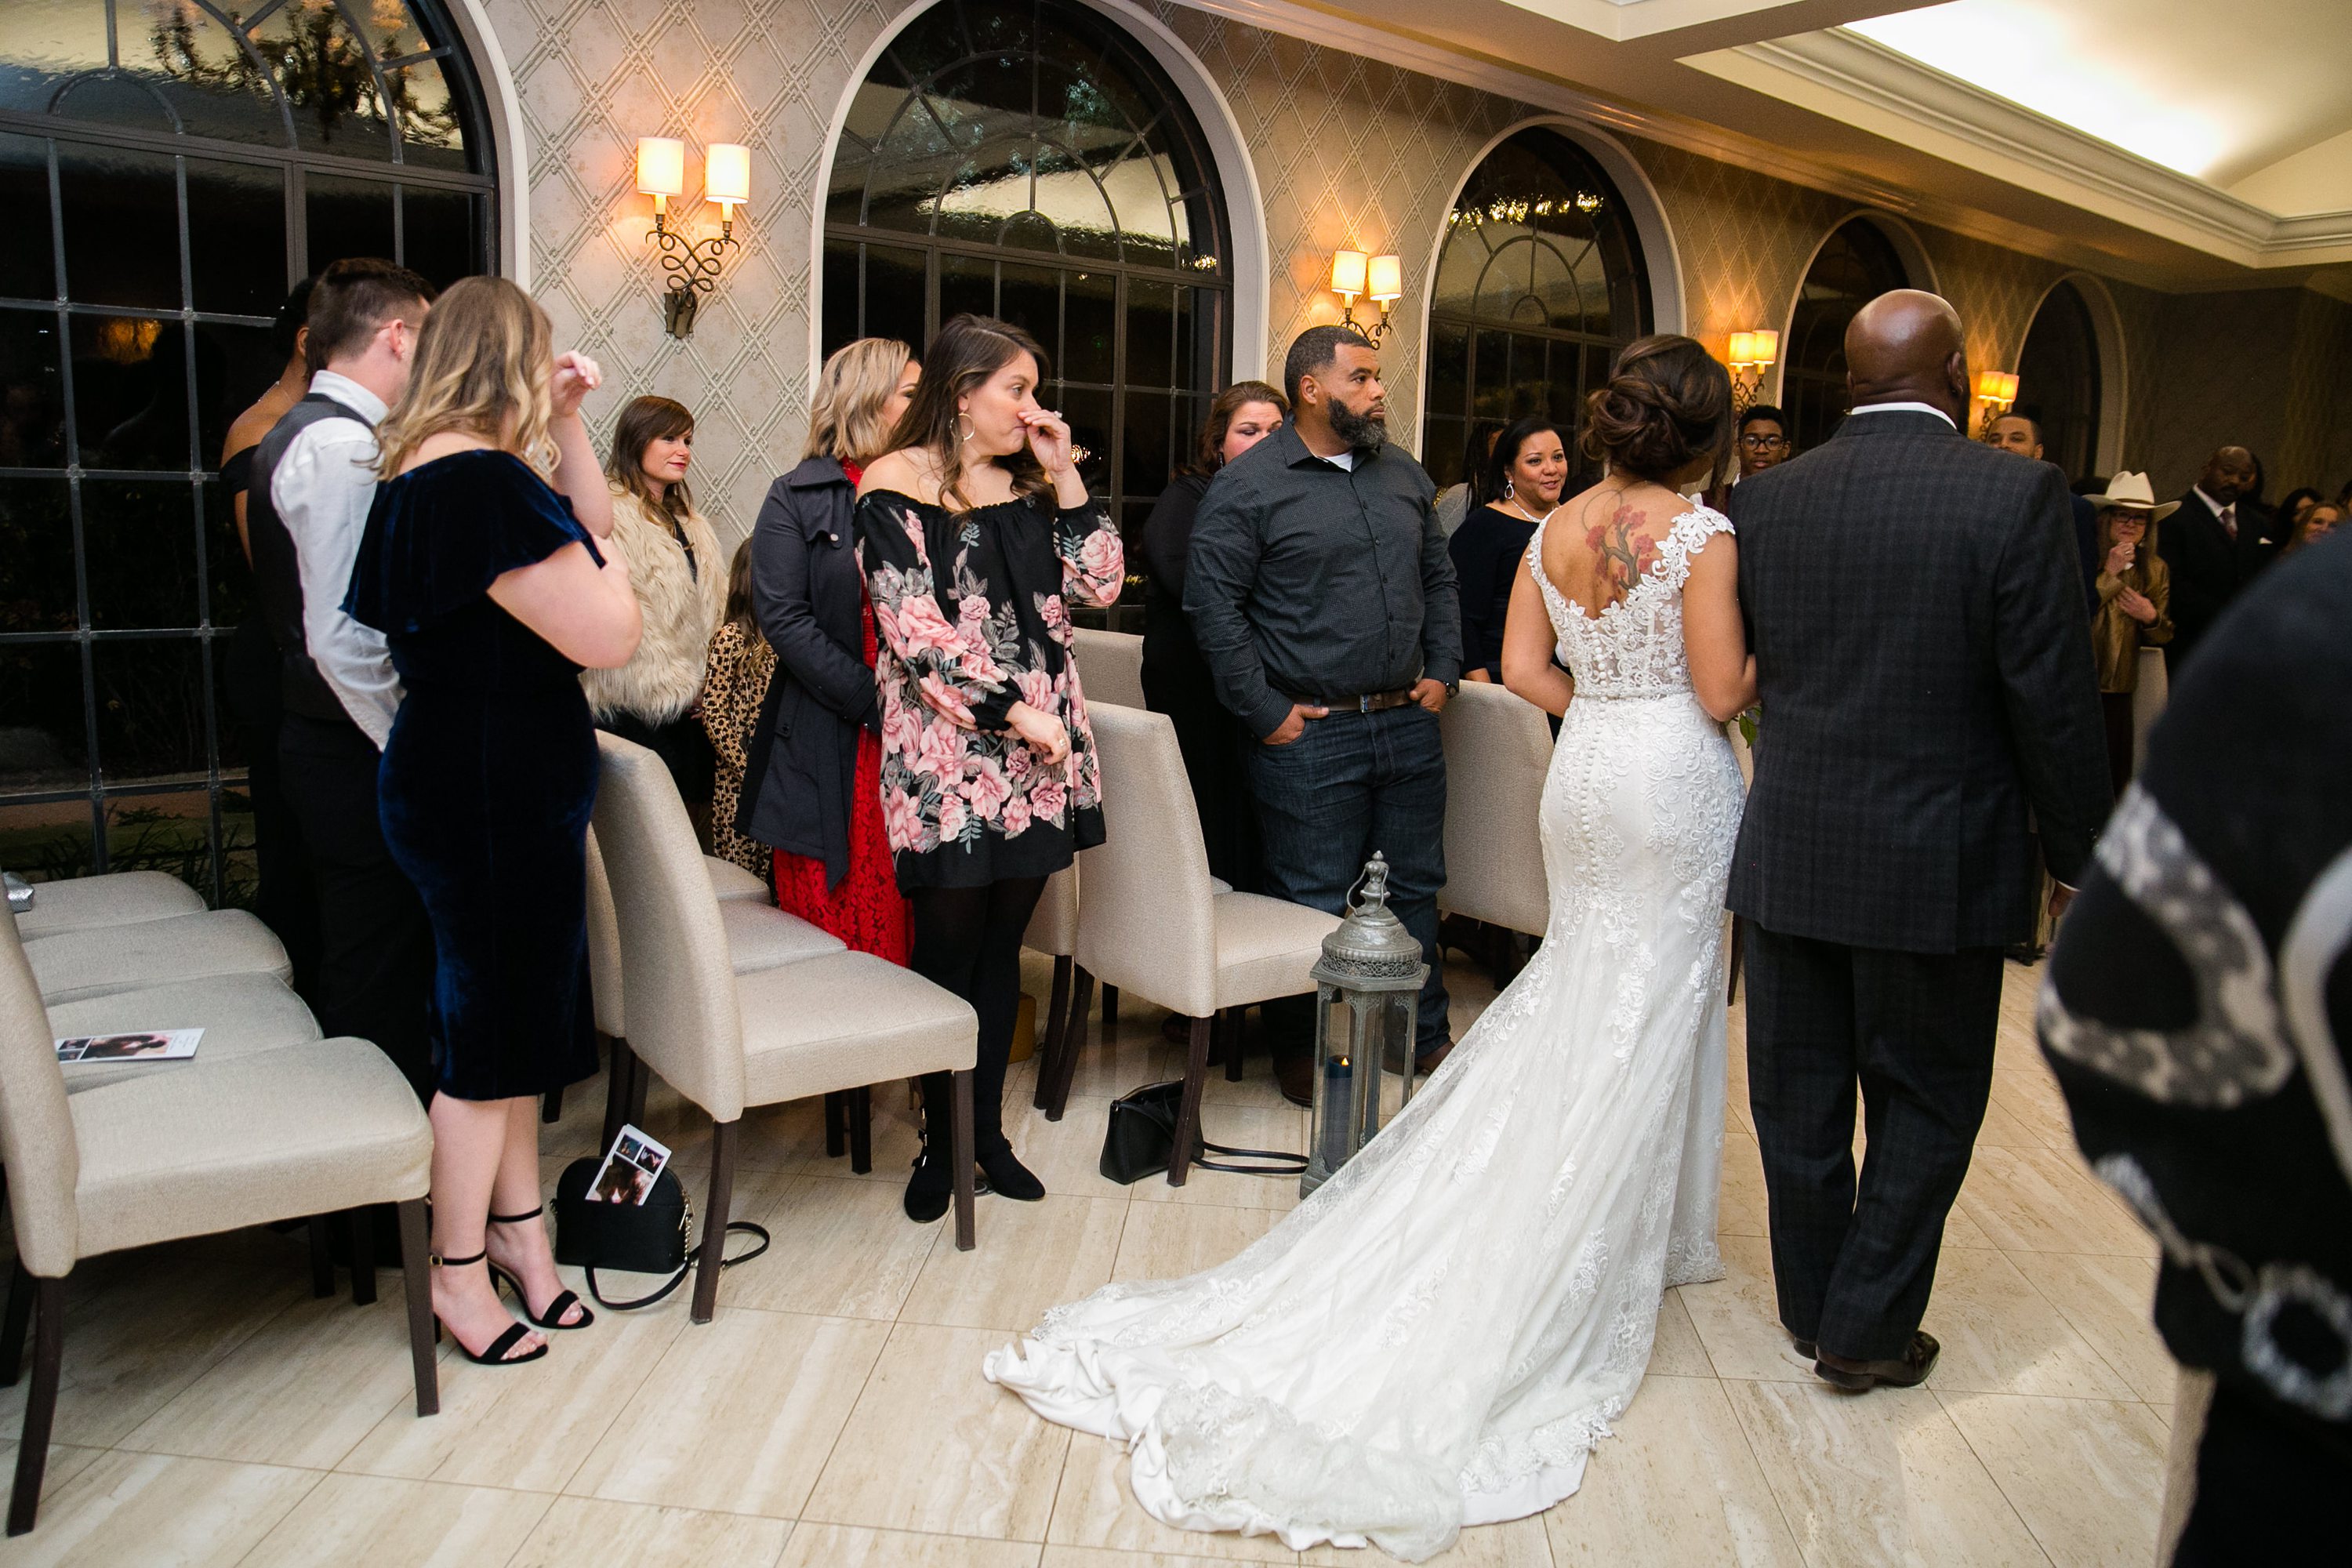  Darian and Holland's wedding at the Rosewood Mansion in Dallas, TX.

Monica Salazar is a Dallas